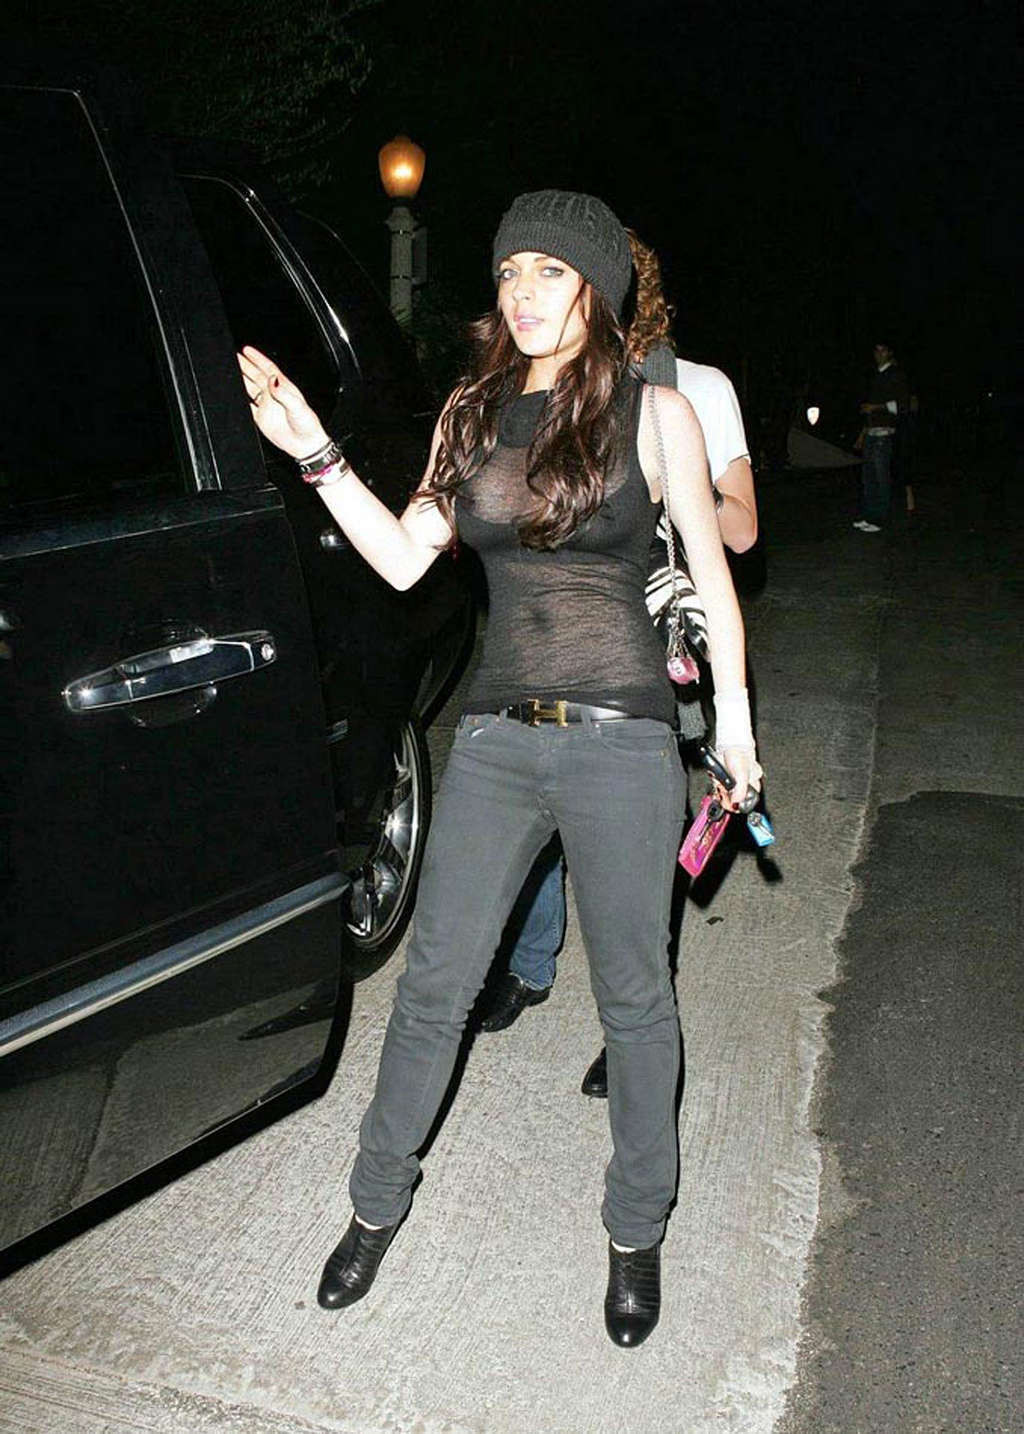 Lindsay Lohan exposing her nice big tits and see thru top paparazzi pictures #75367958